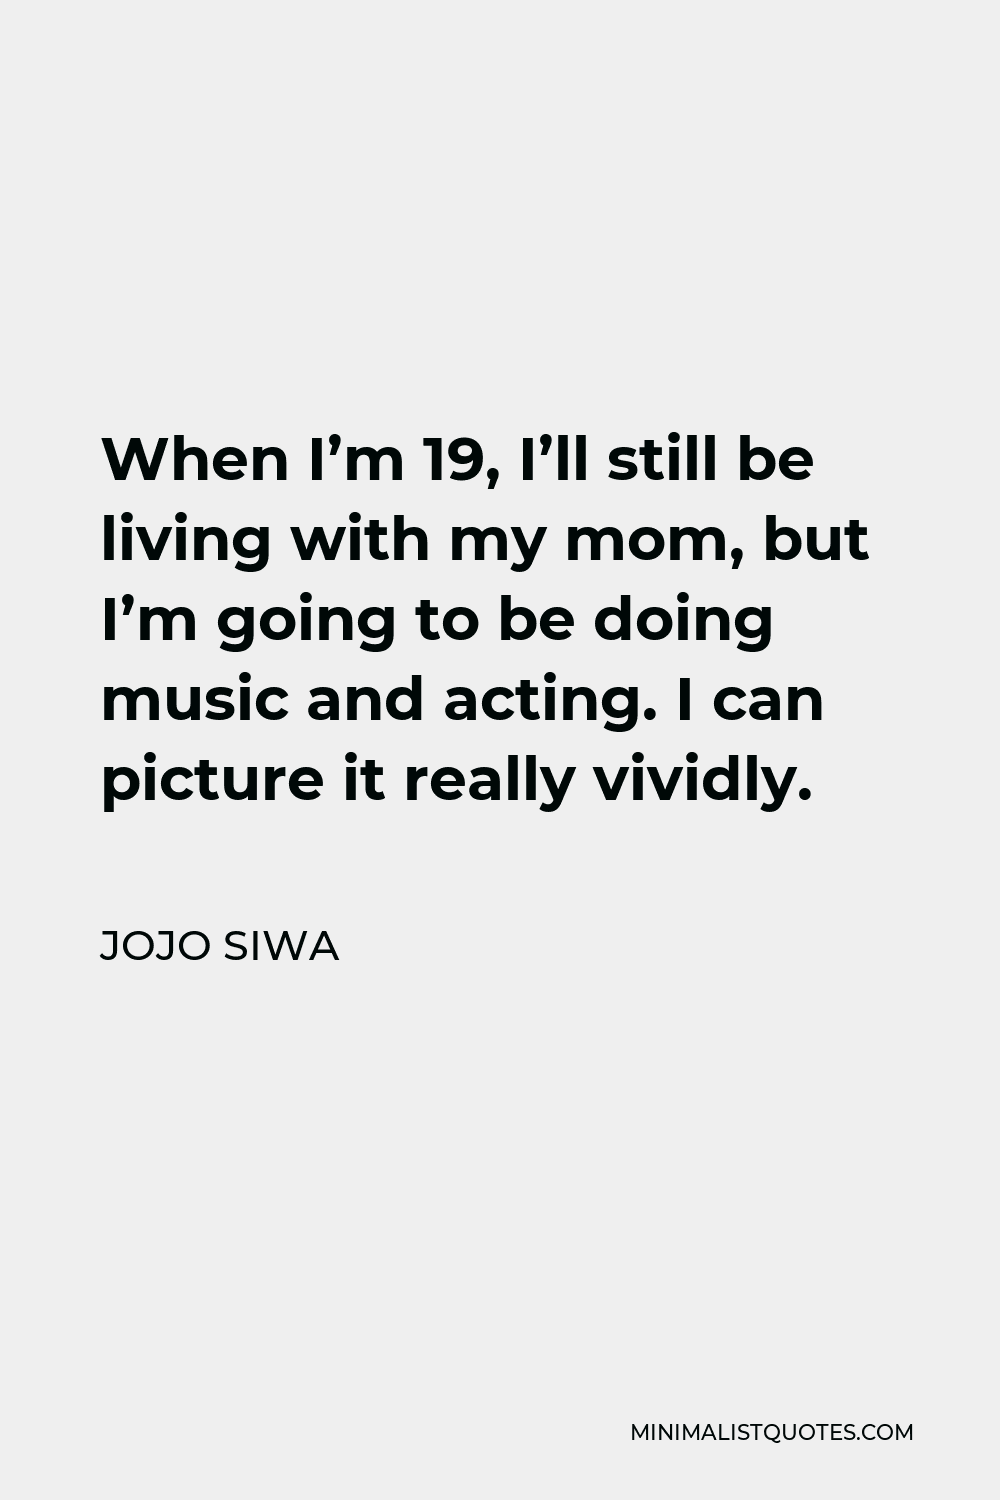 JoJo Siwa Quote - When I’m 19, I’ll still be living with my mom, but I’m going to be doing music and acting. I can picture it really vividly.